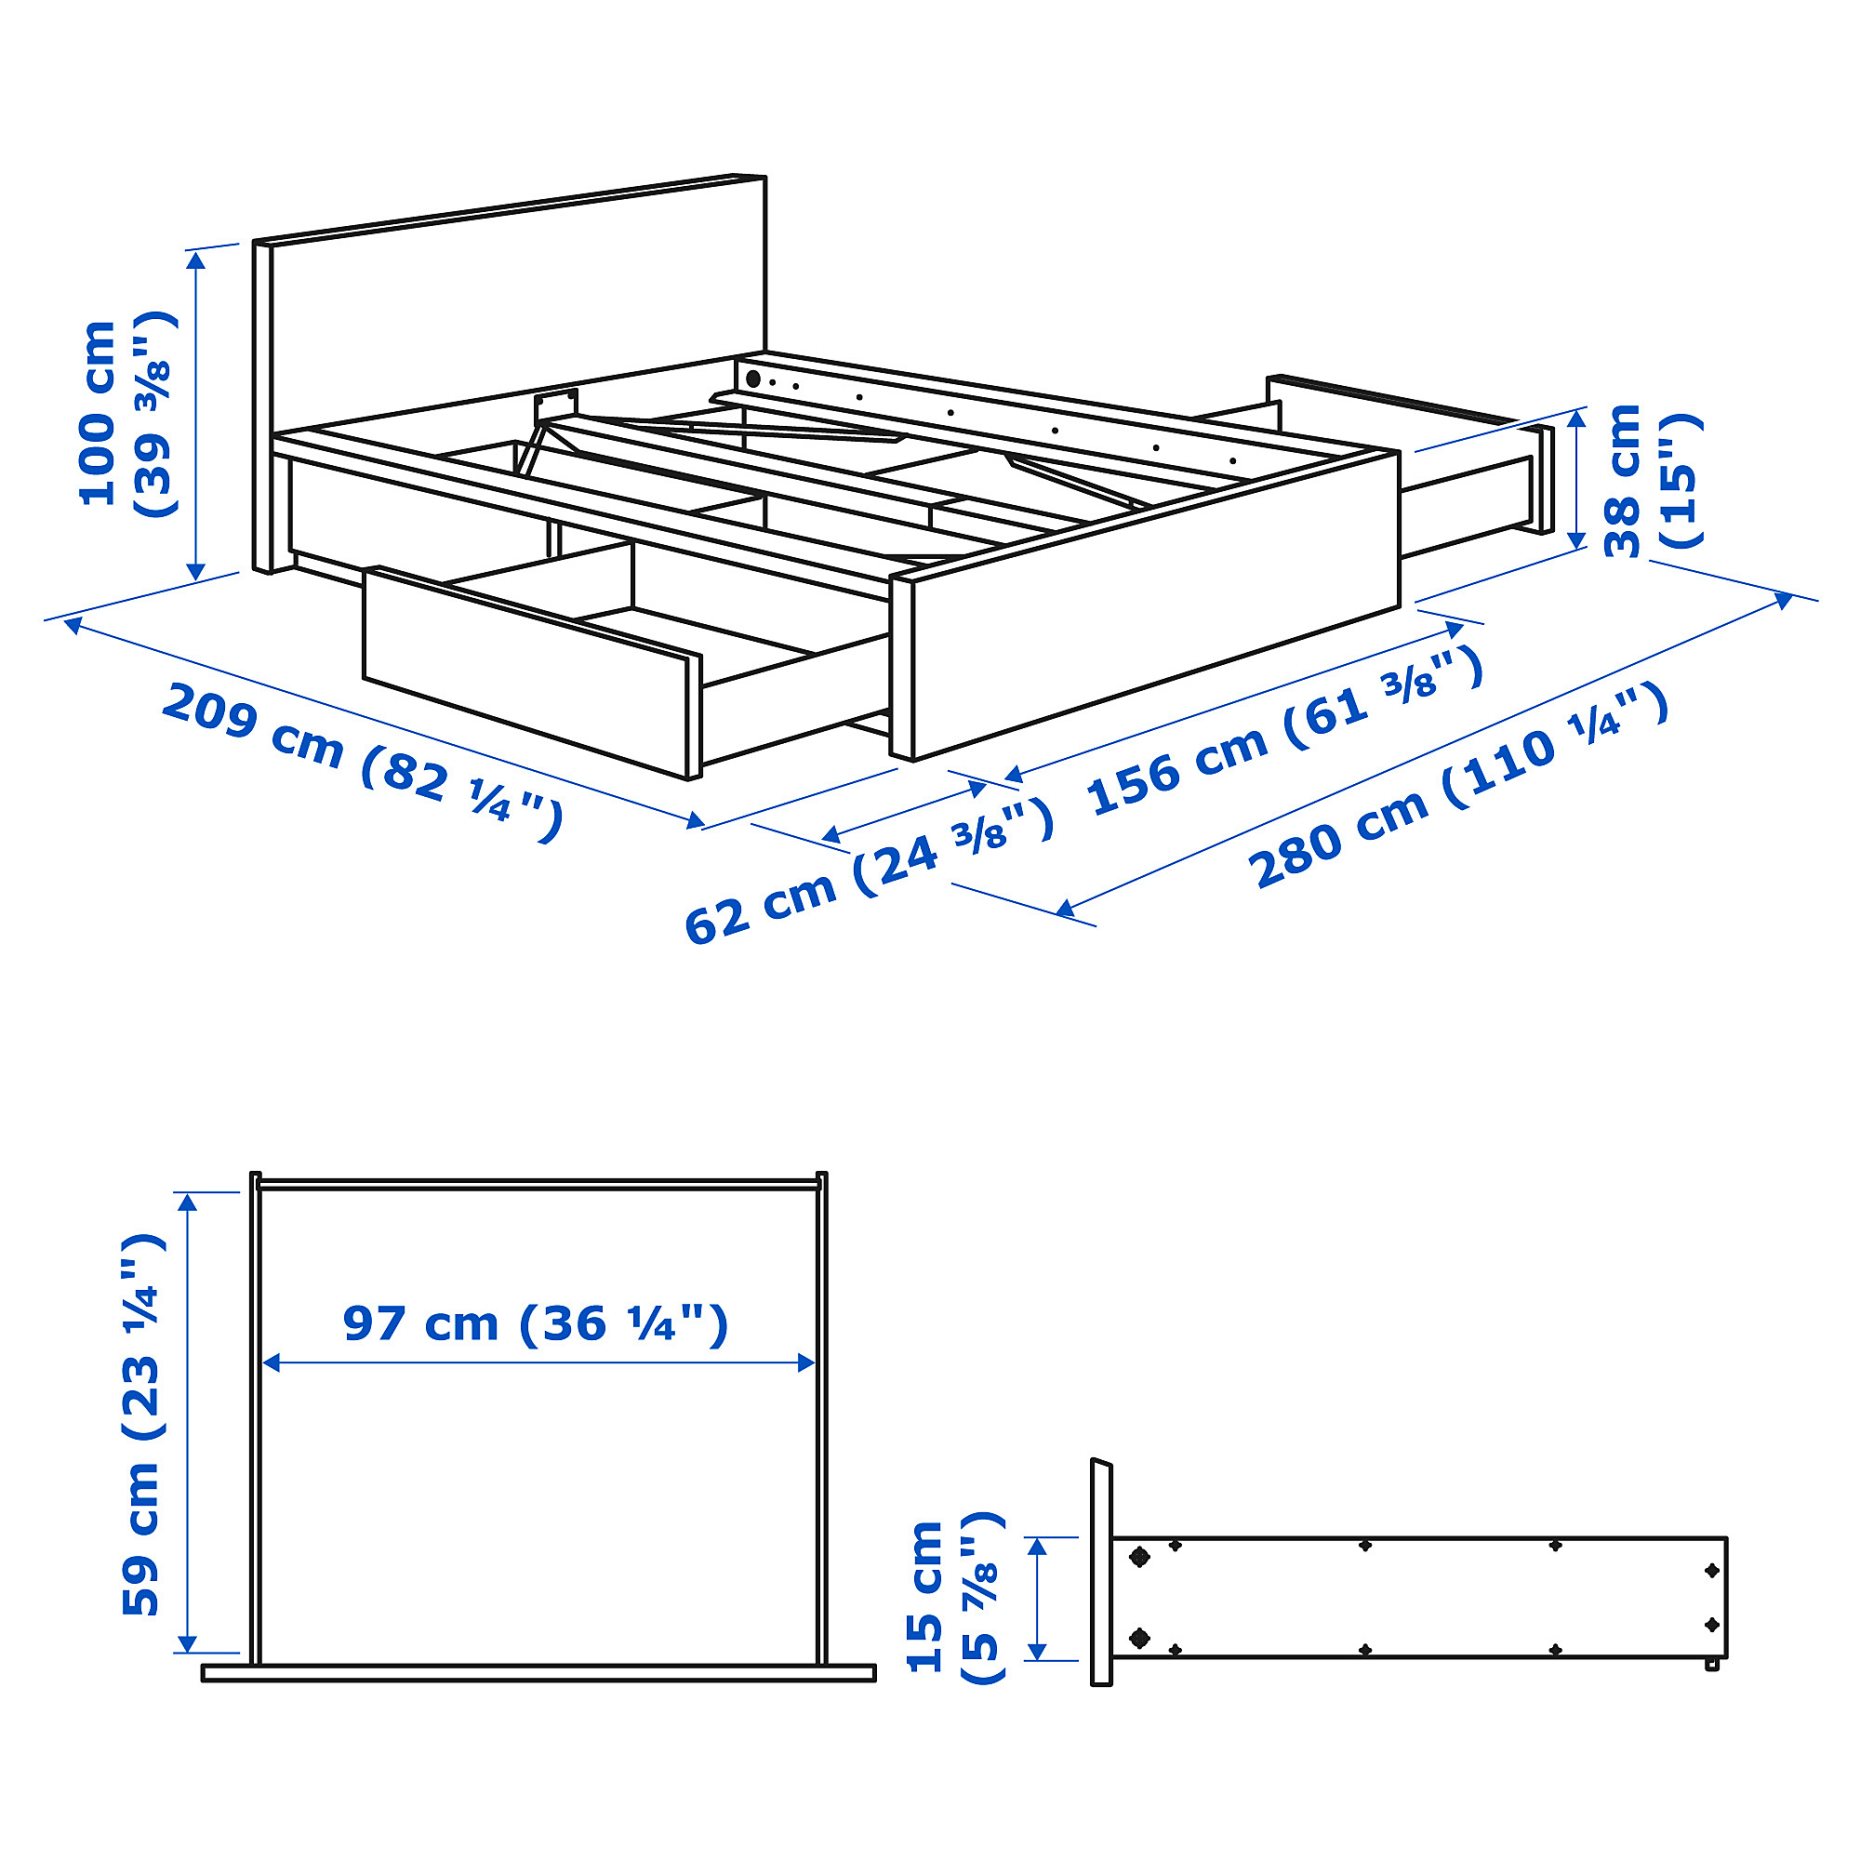 MALM, bed frame/high with 4 storage boxes, 140X200 cm, 794.950.17